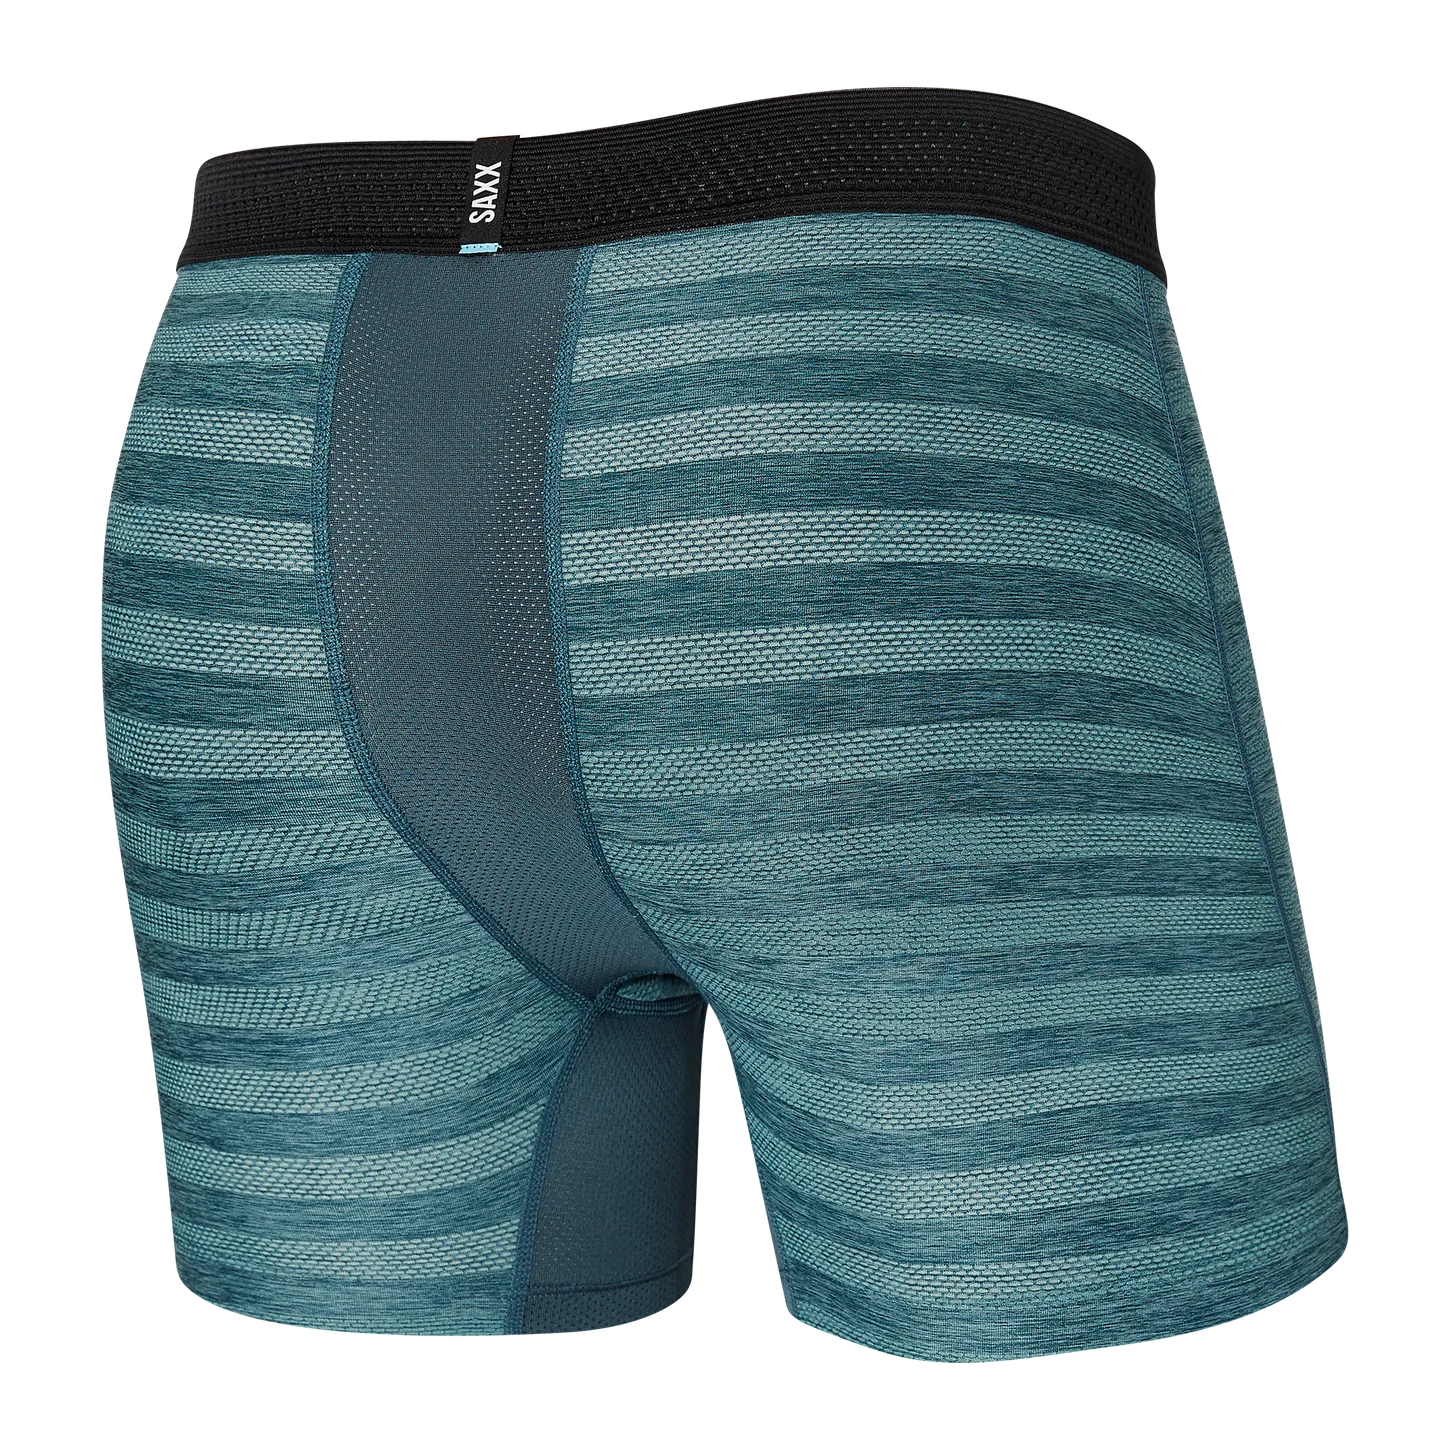 SAXX Droptemp Cooling Mesh Boxer Brief - Washed Teal Heather - Teal - 2 - Underwear - Boxer Briefs